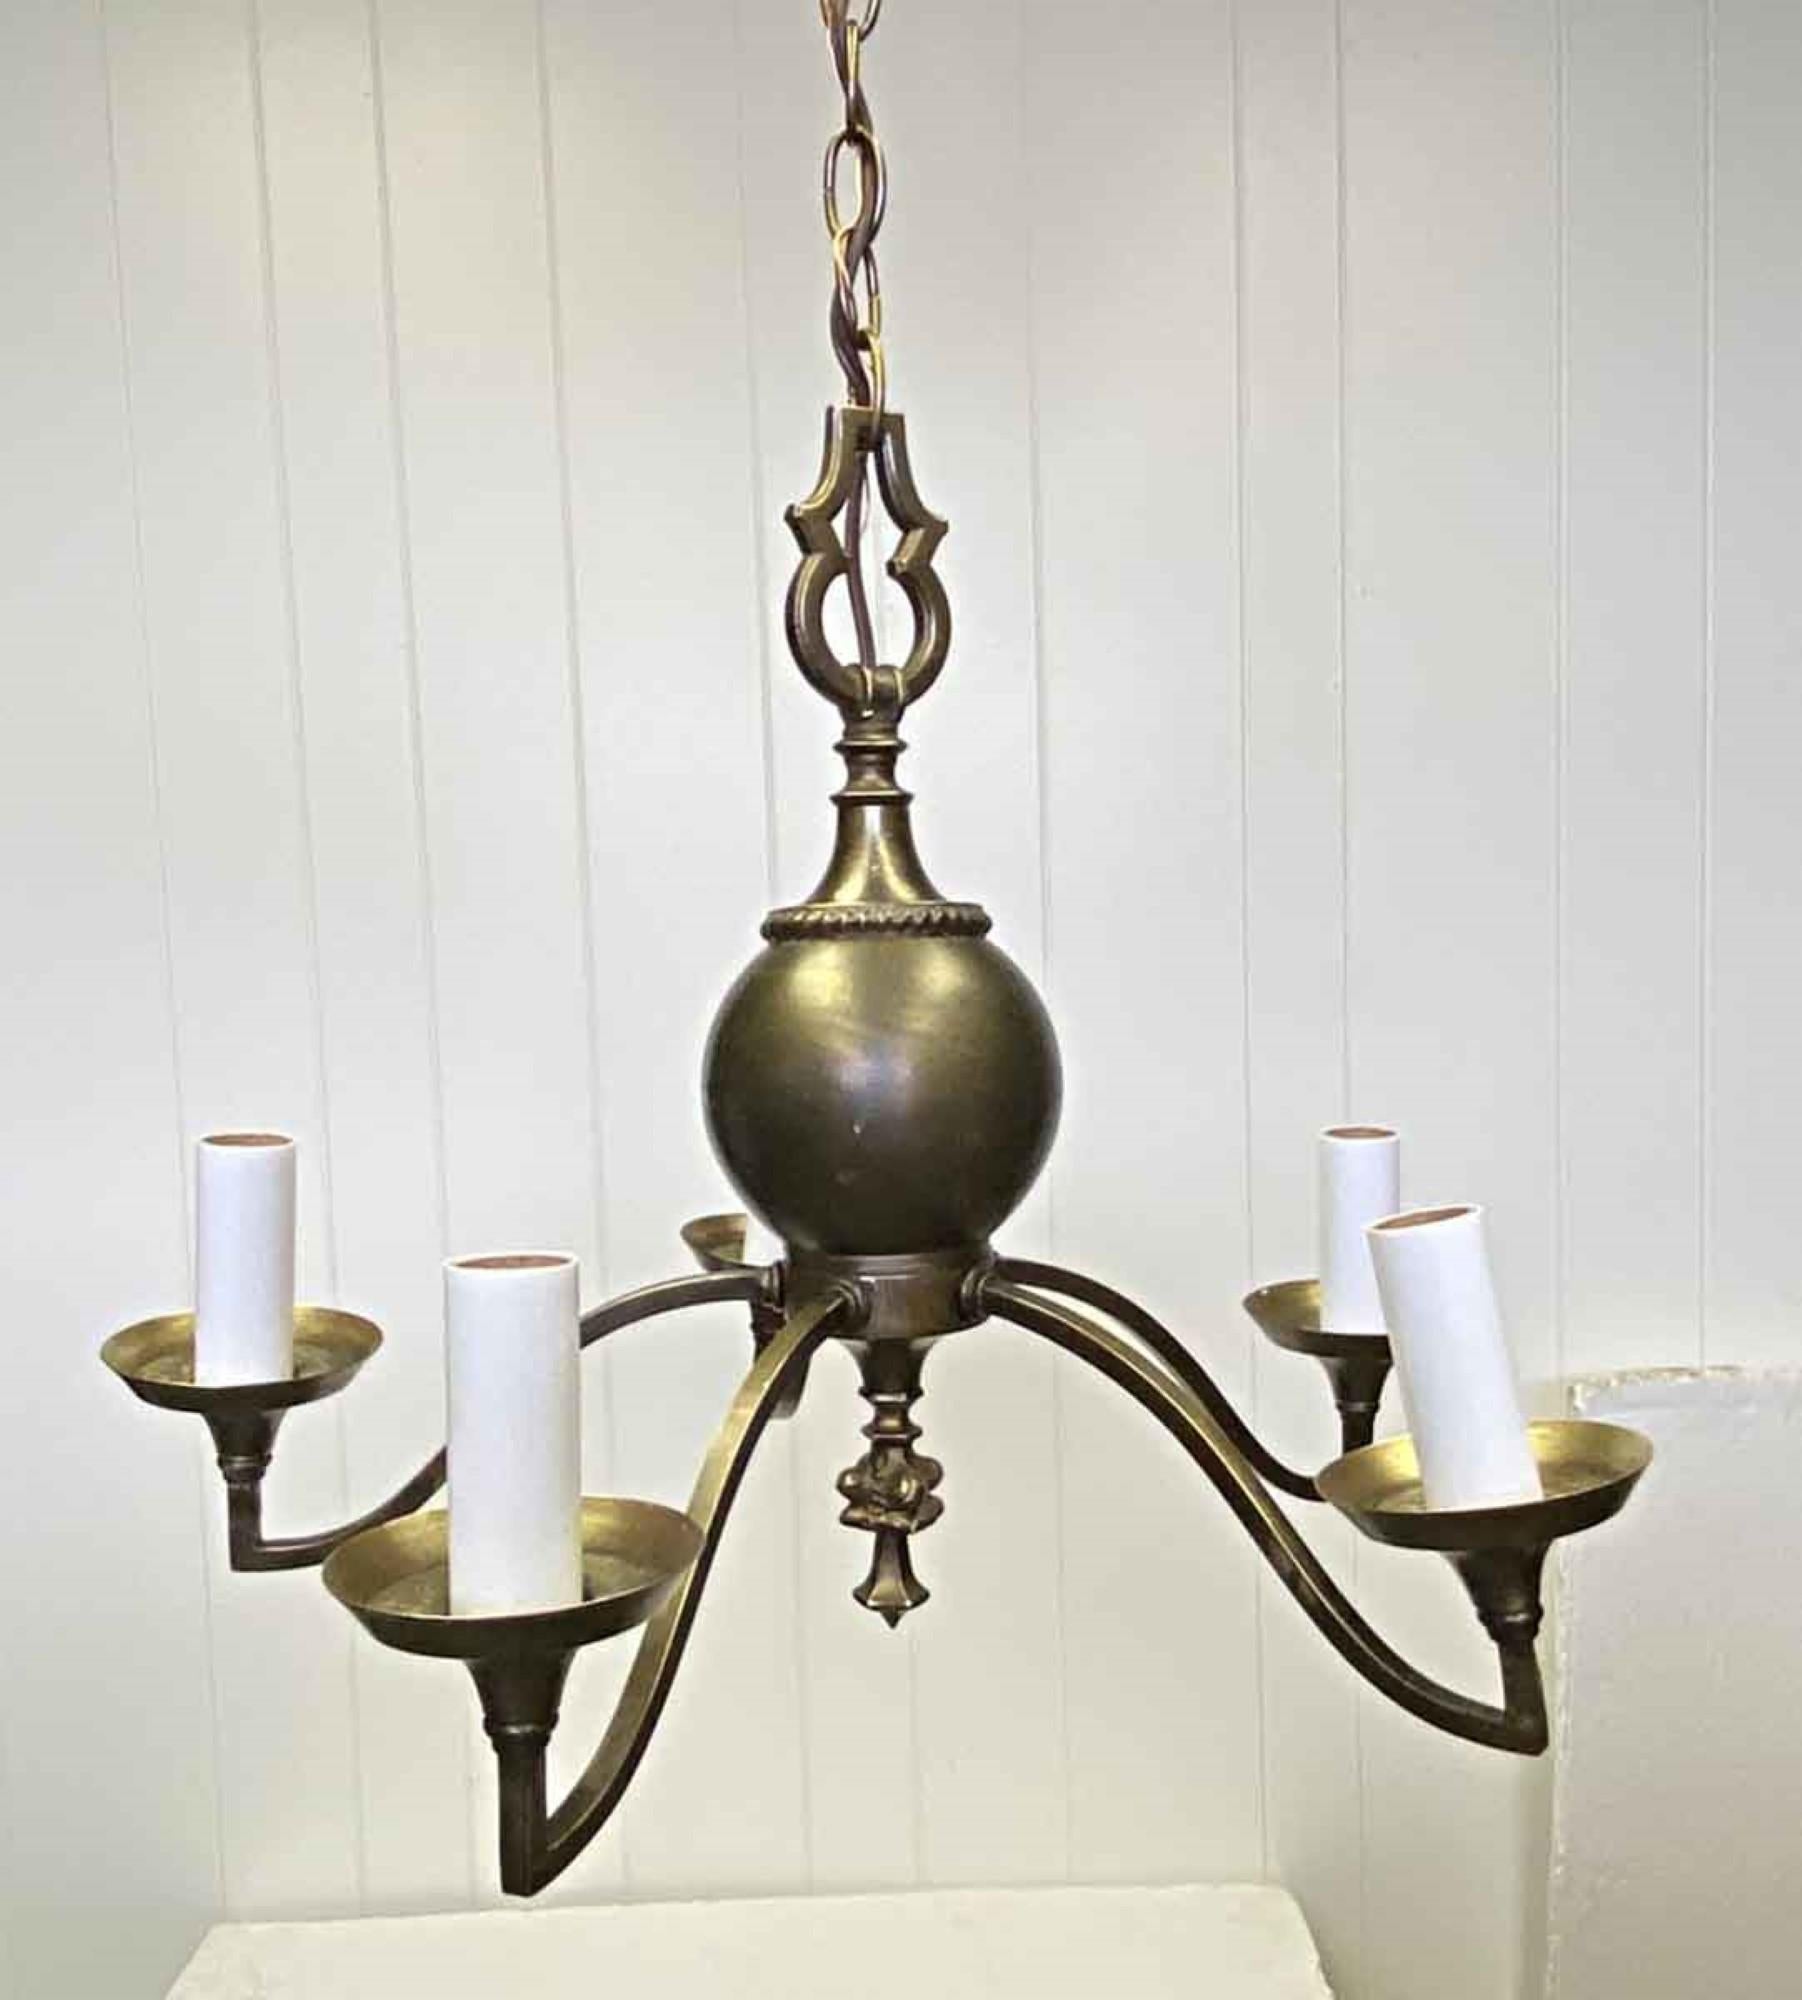 1980s Arts & Crafts style 5-arm brass chandelier with a satin finish. There are some imperfections from age. Priced each. Small quantity available at time of posting. This can be seen at our 400 Gilligan St location in Scranton, PA.